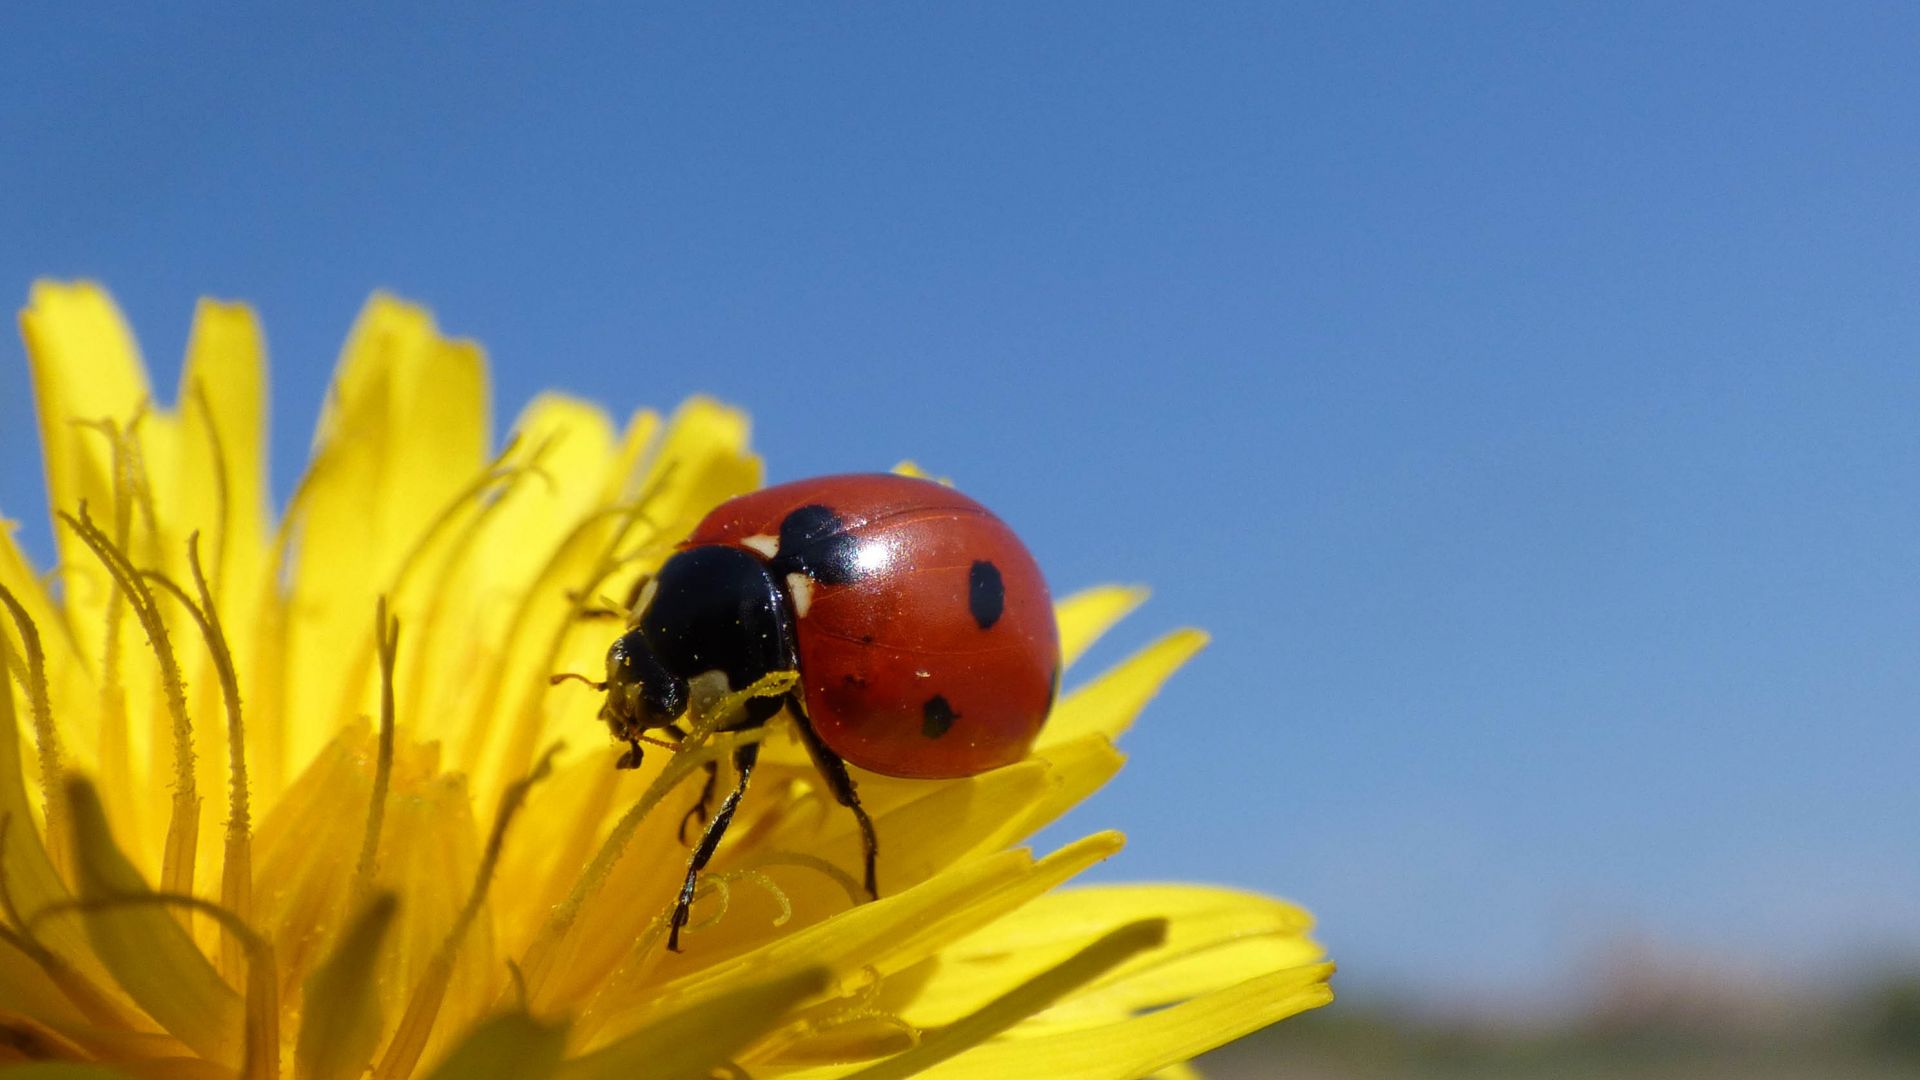 Wallpaper Ladybug, insects, yellow flower, close up